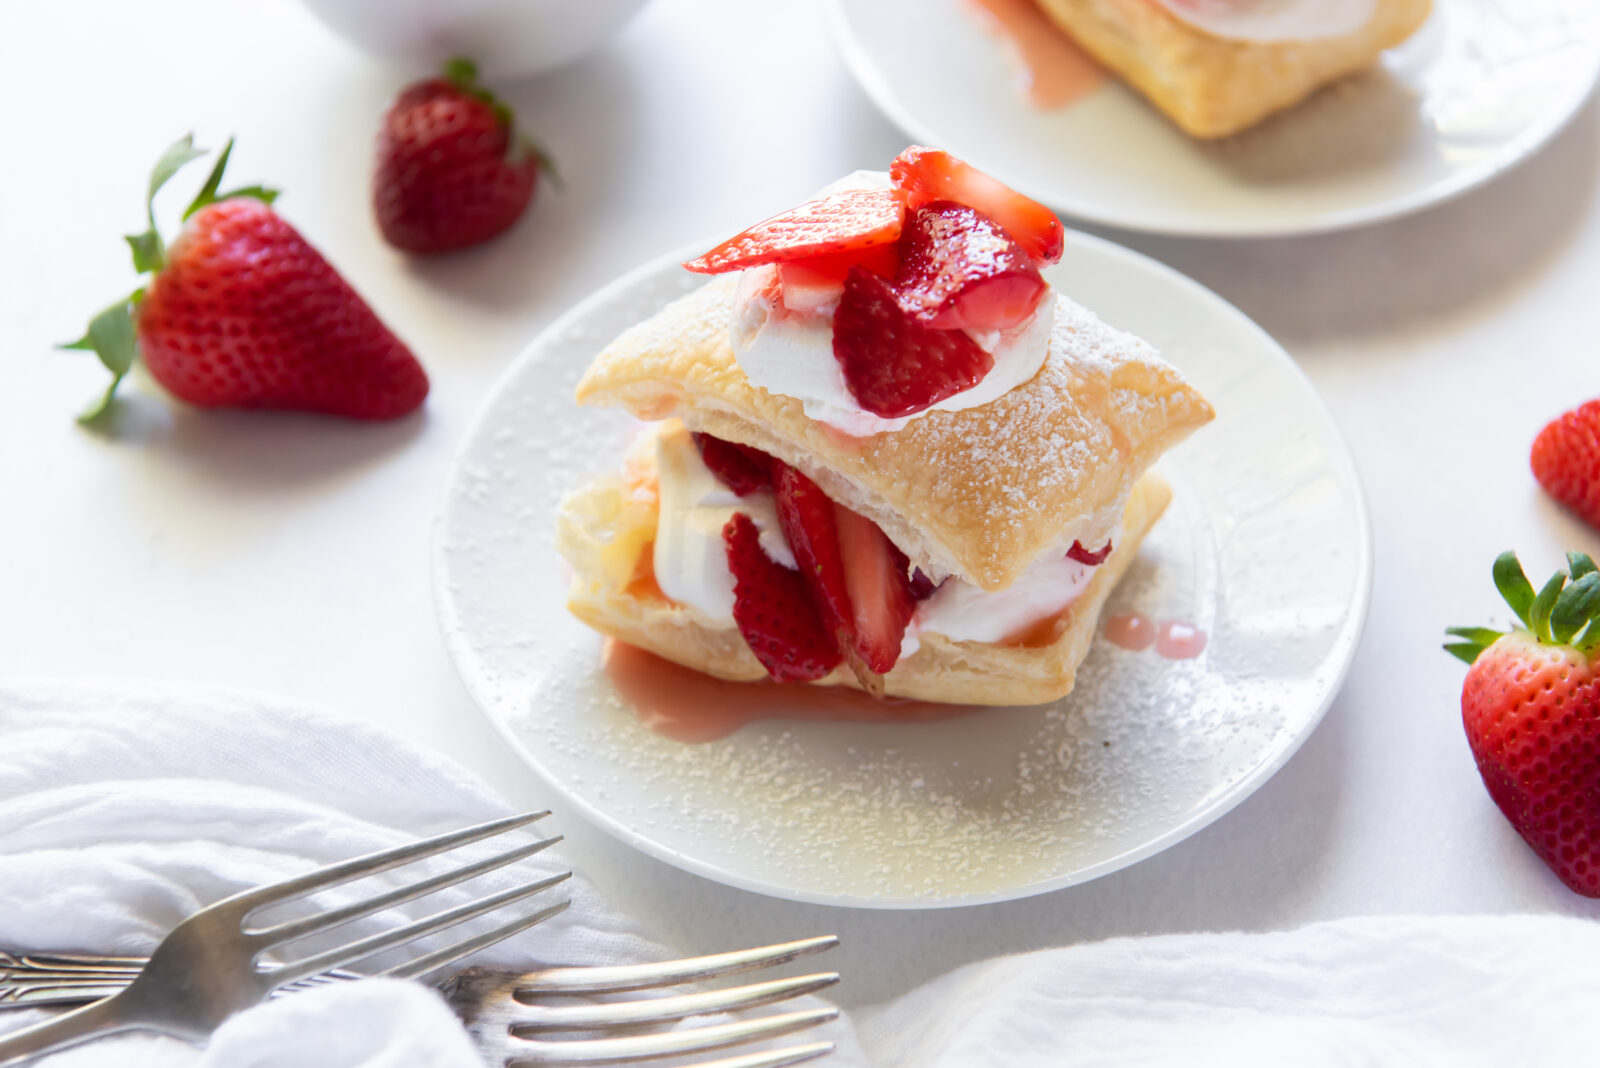 Easy Strawberry Puff Pastry Stacks with Cream - Cooking Gorgeous